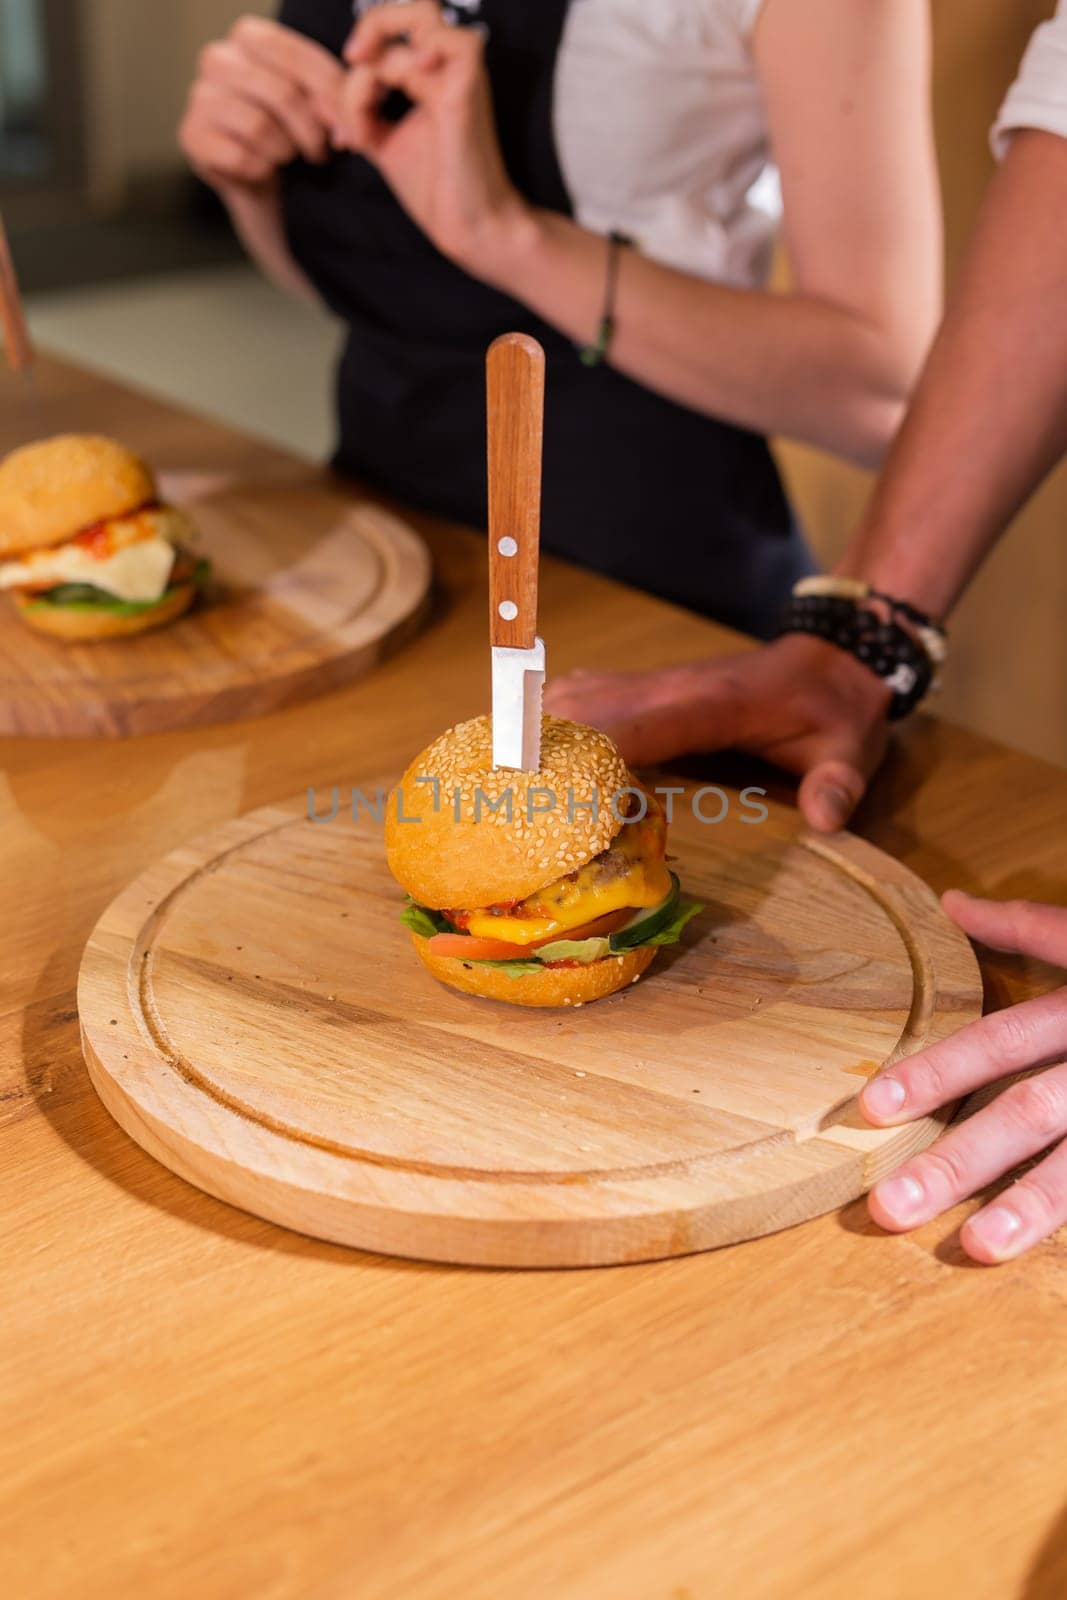 Beef burgers on wooden desk. Fat unhealthy food close-up by Satura86